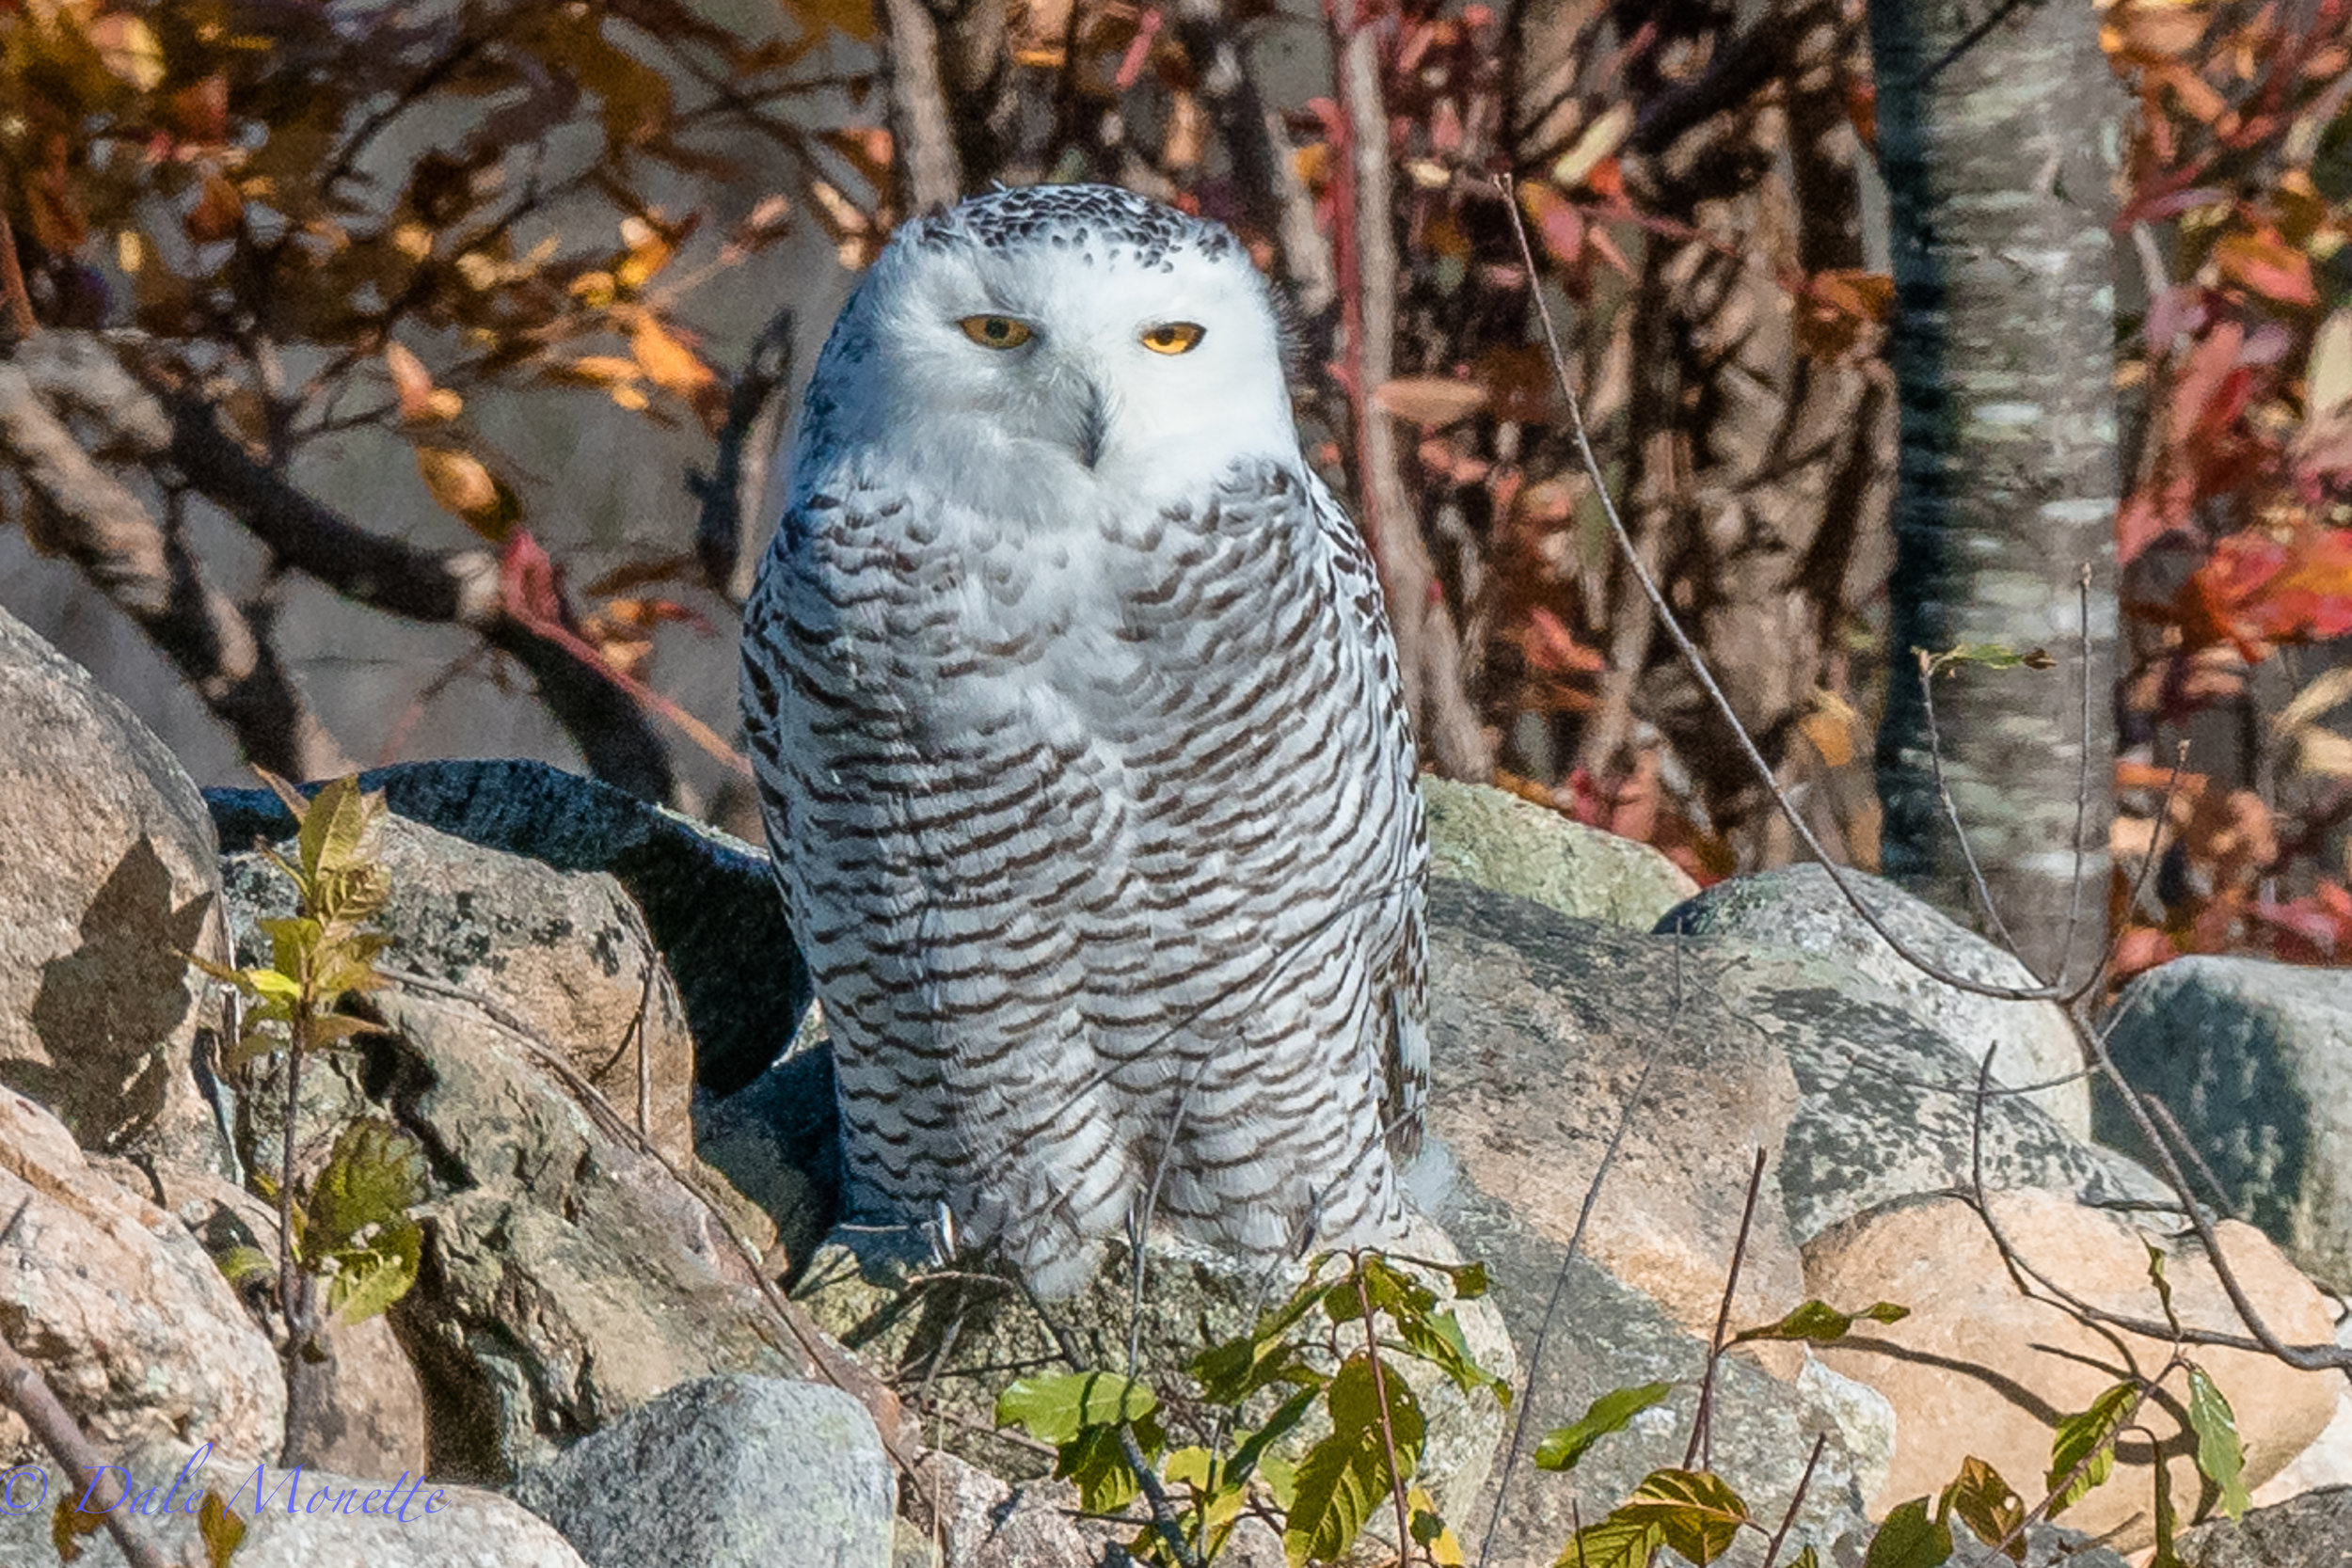   WOW,&nbsp; a snowy owl, first of the year!&nbsp; 2 miles from my house !!&nbsp; &nbsp;11/10/17  